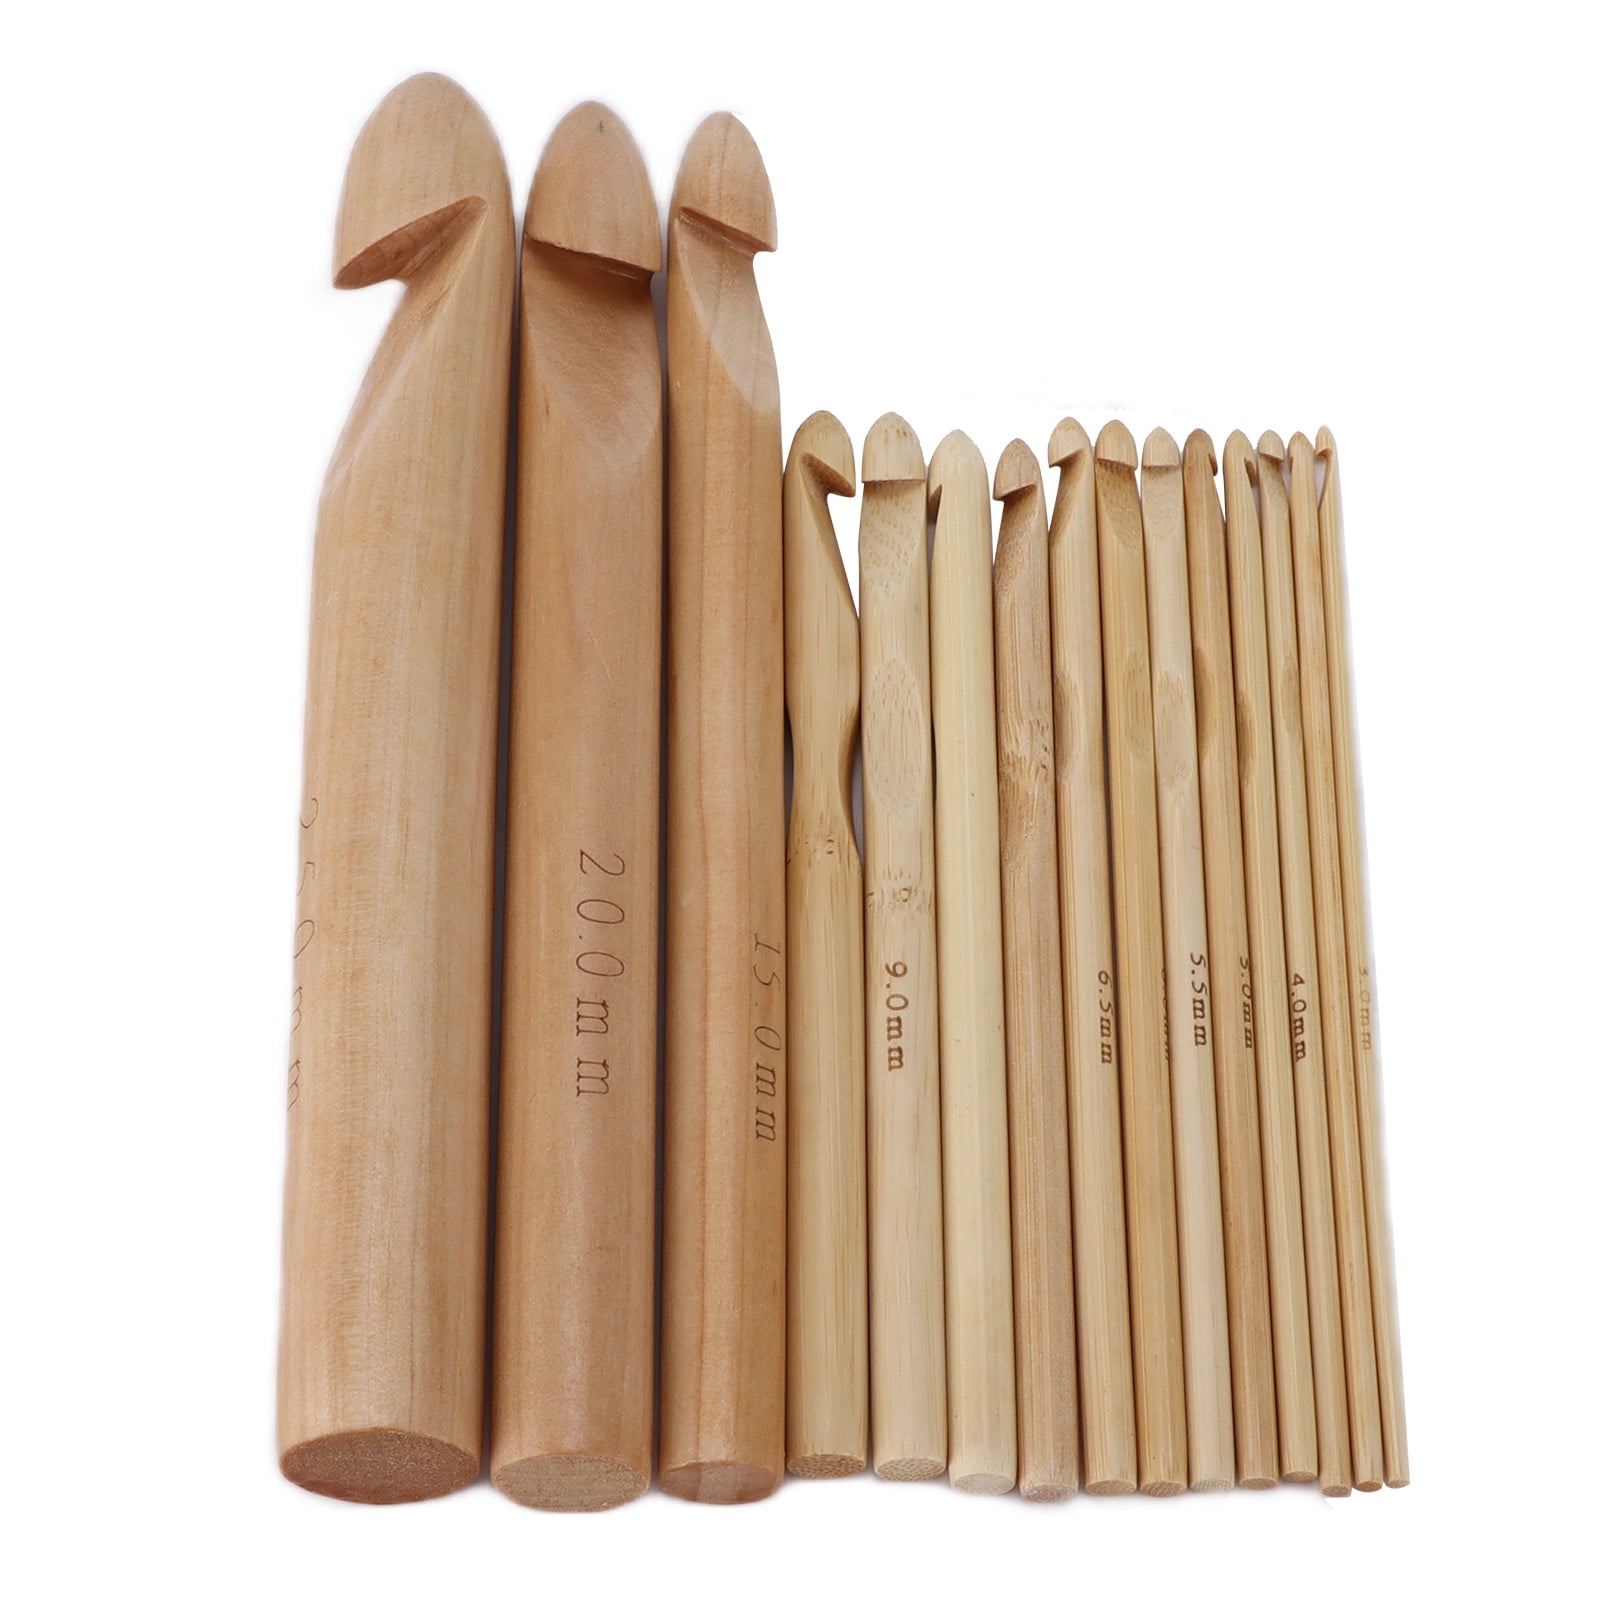 15/20/25mm Crochet Hooks Circular Bamboo Thick Knitting Needles Double  Pointed Yarn Dyed Sewing Tools